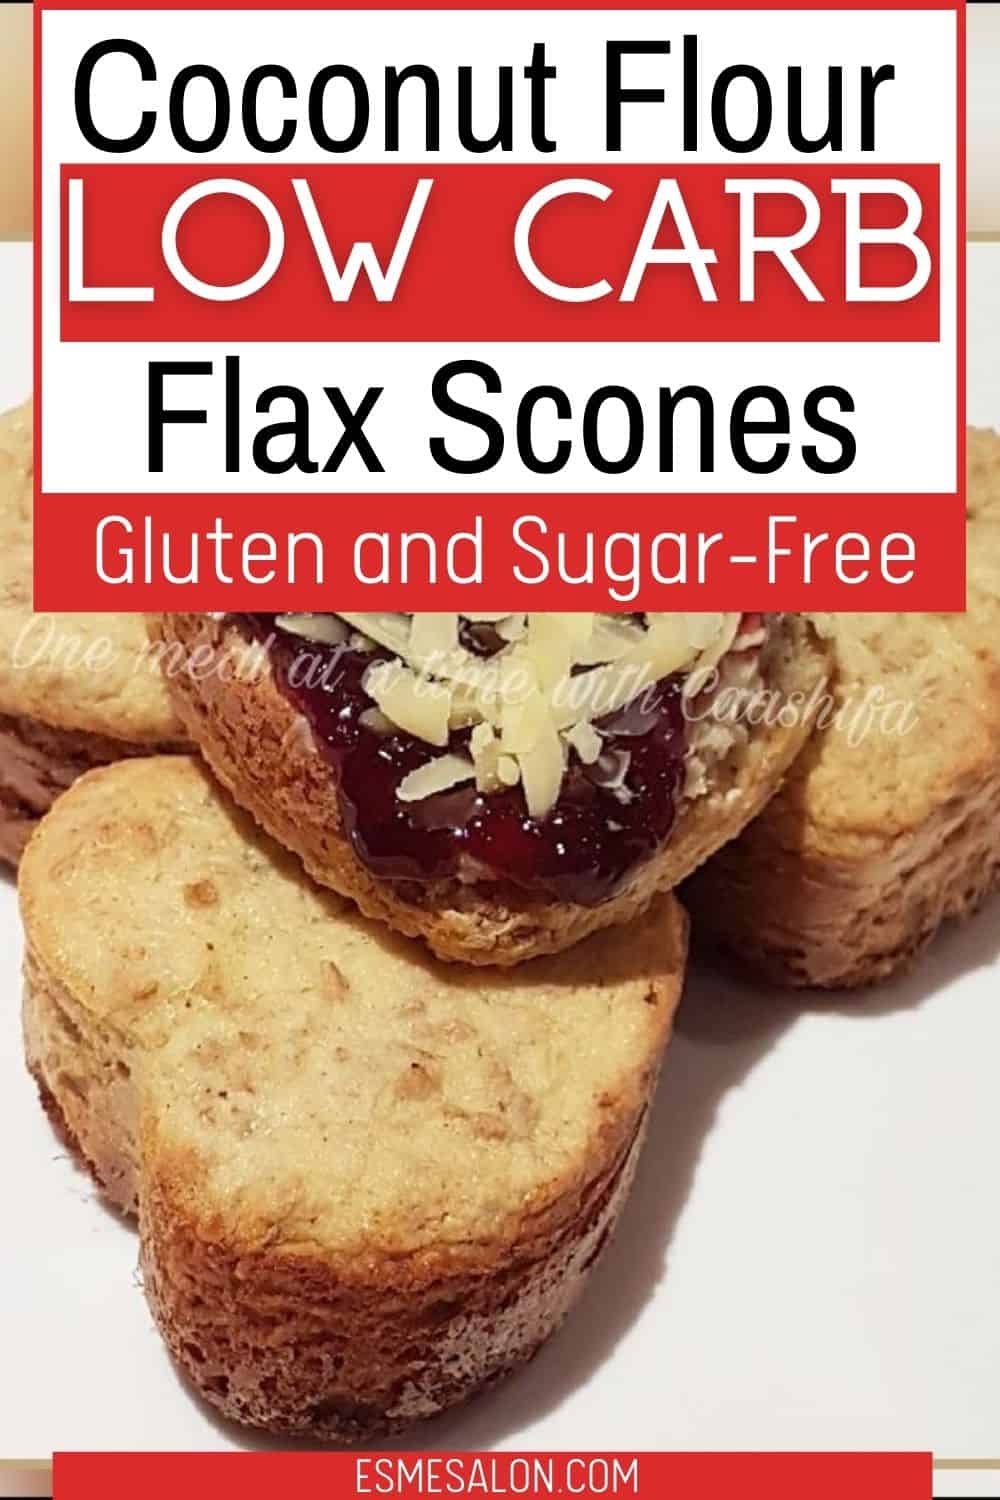 Heart shaped flax scones with ham and grated cheese